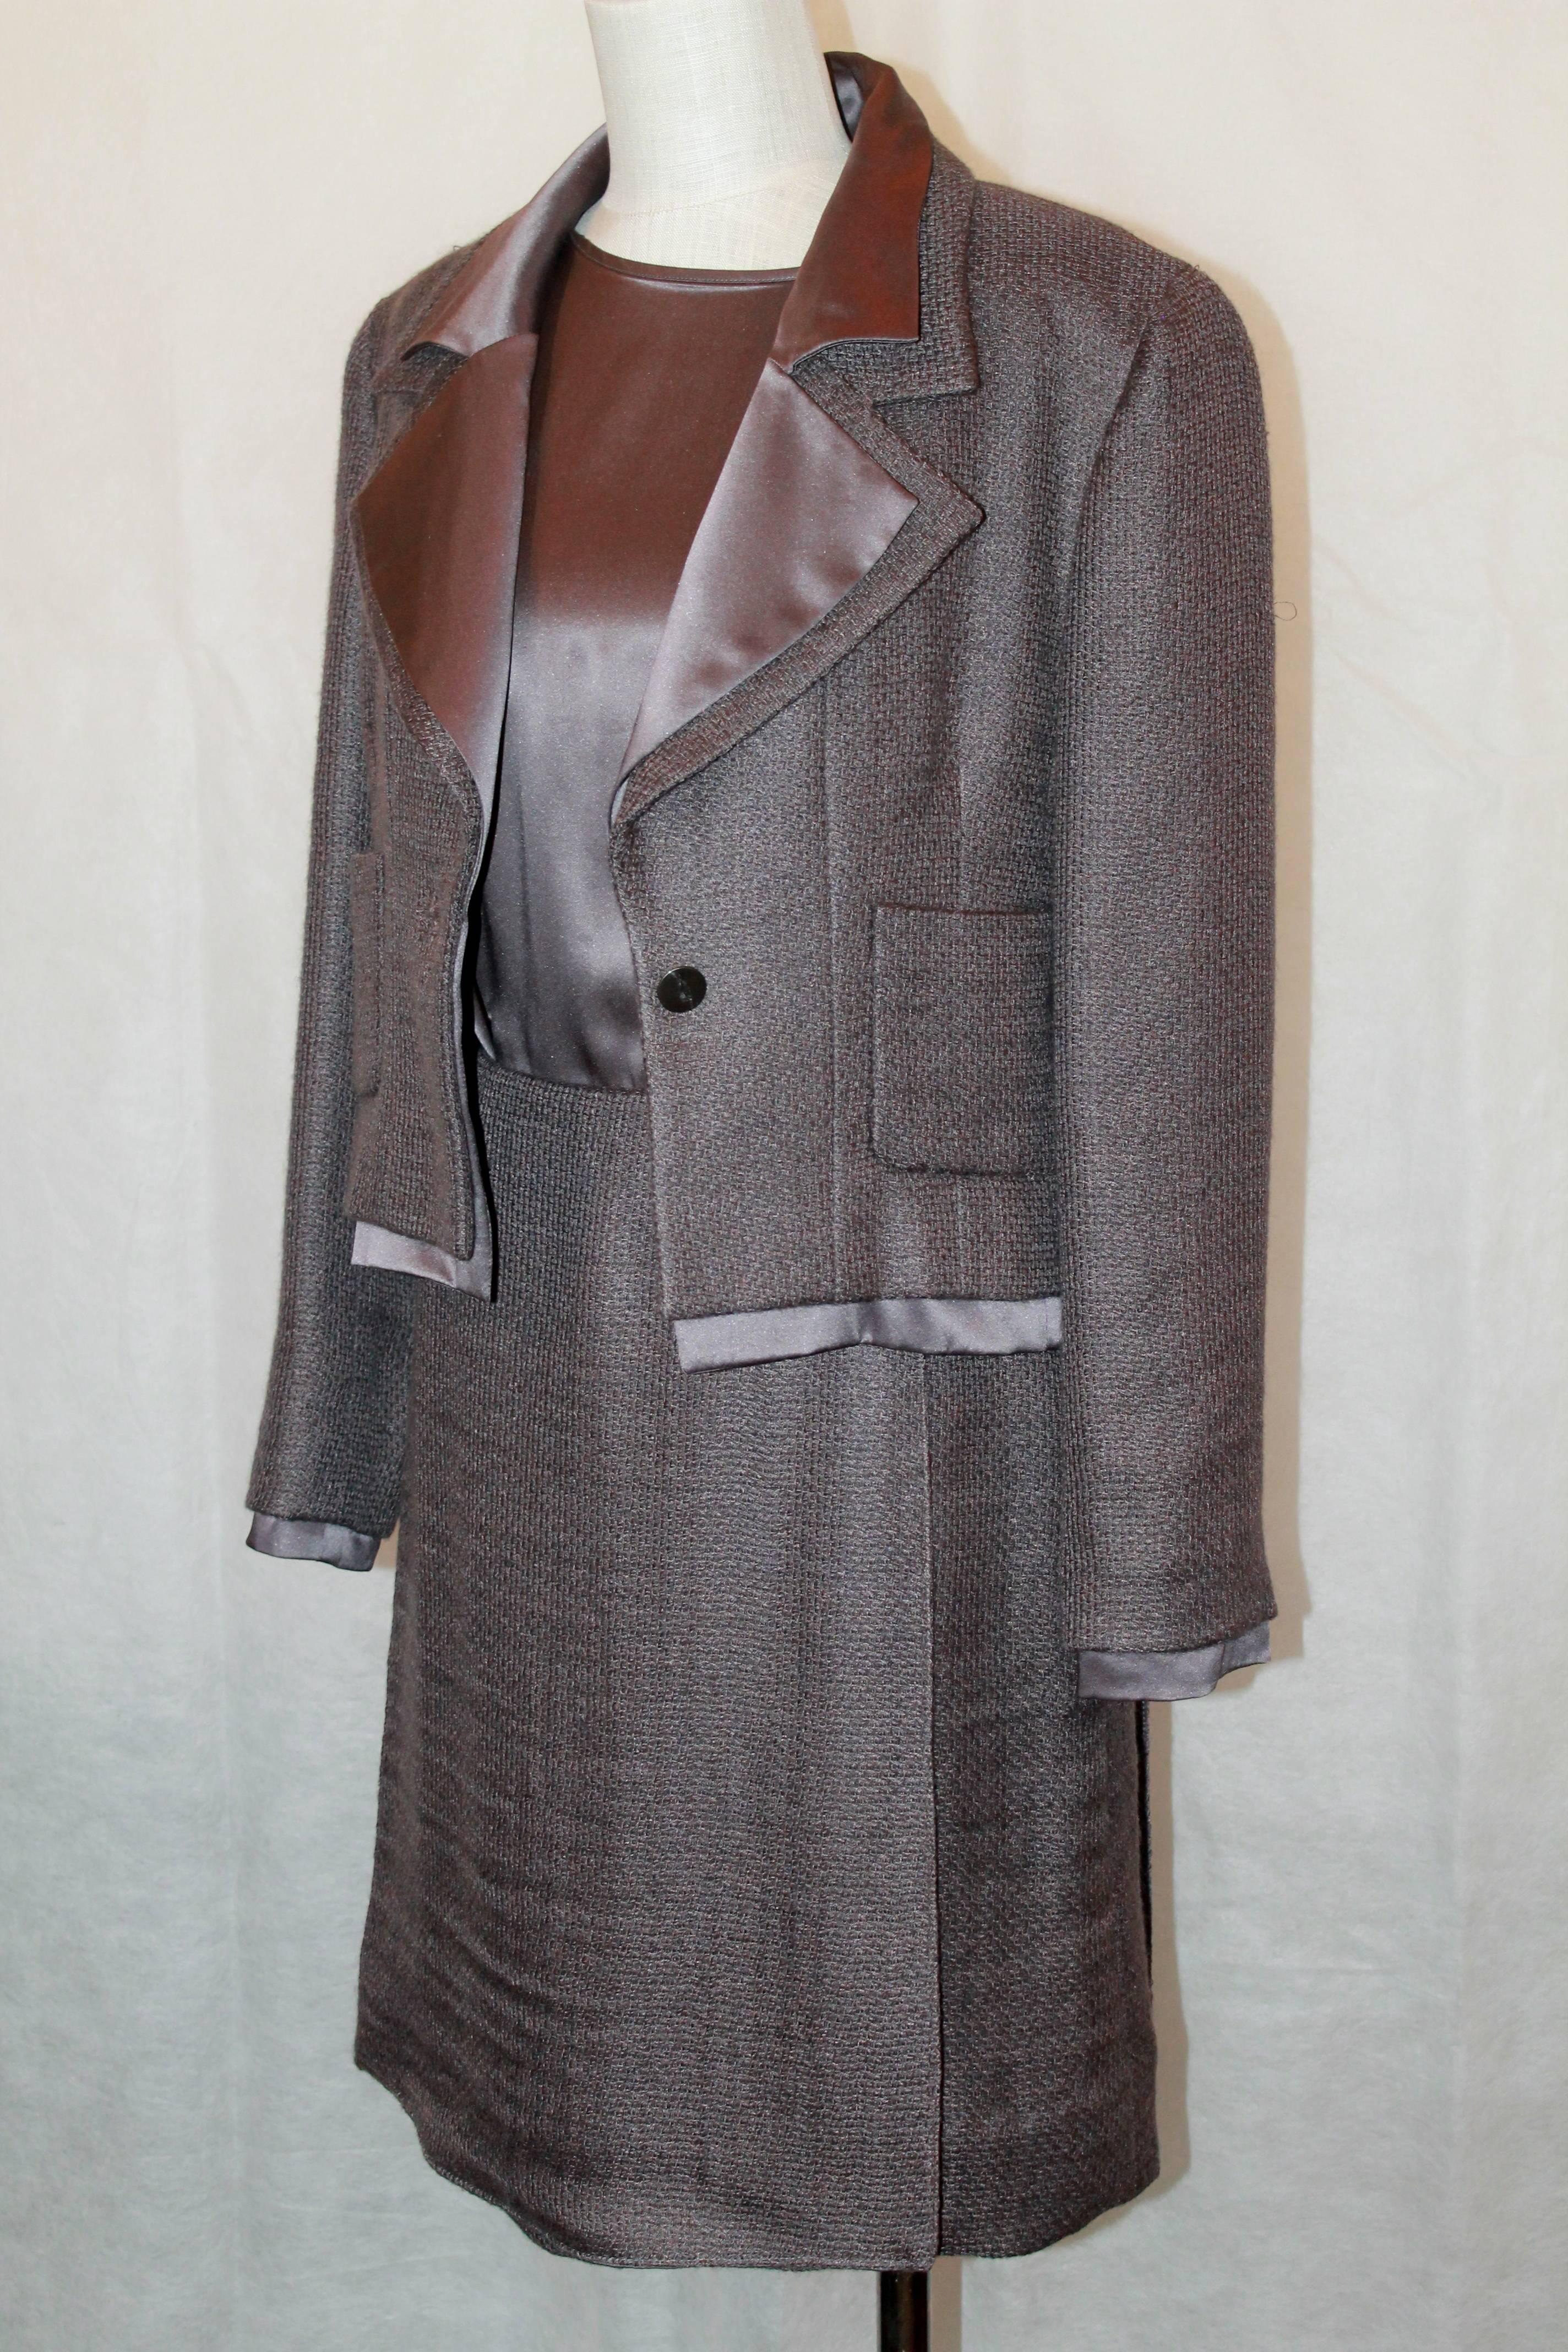 Chanel Vintage Eggplant Mohair & Silk Skirt Suit & Top Set -  Size 40  Fall 1999.  This beautiful Chanel skirt suit and top set is in very good condition with only few snags on the jacket and one on the back of the top.  It features a silk